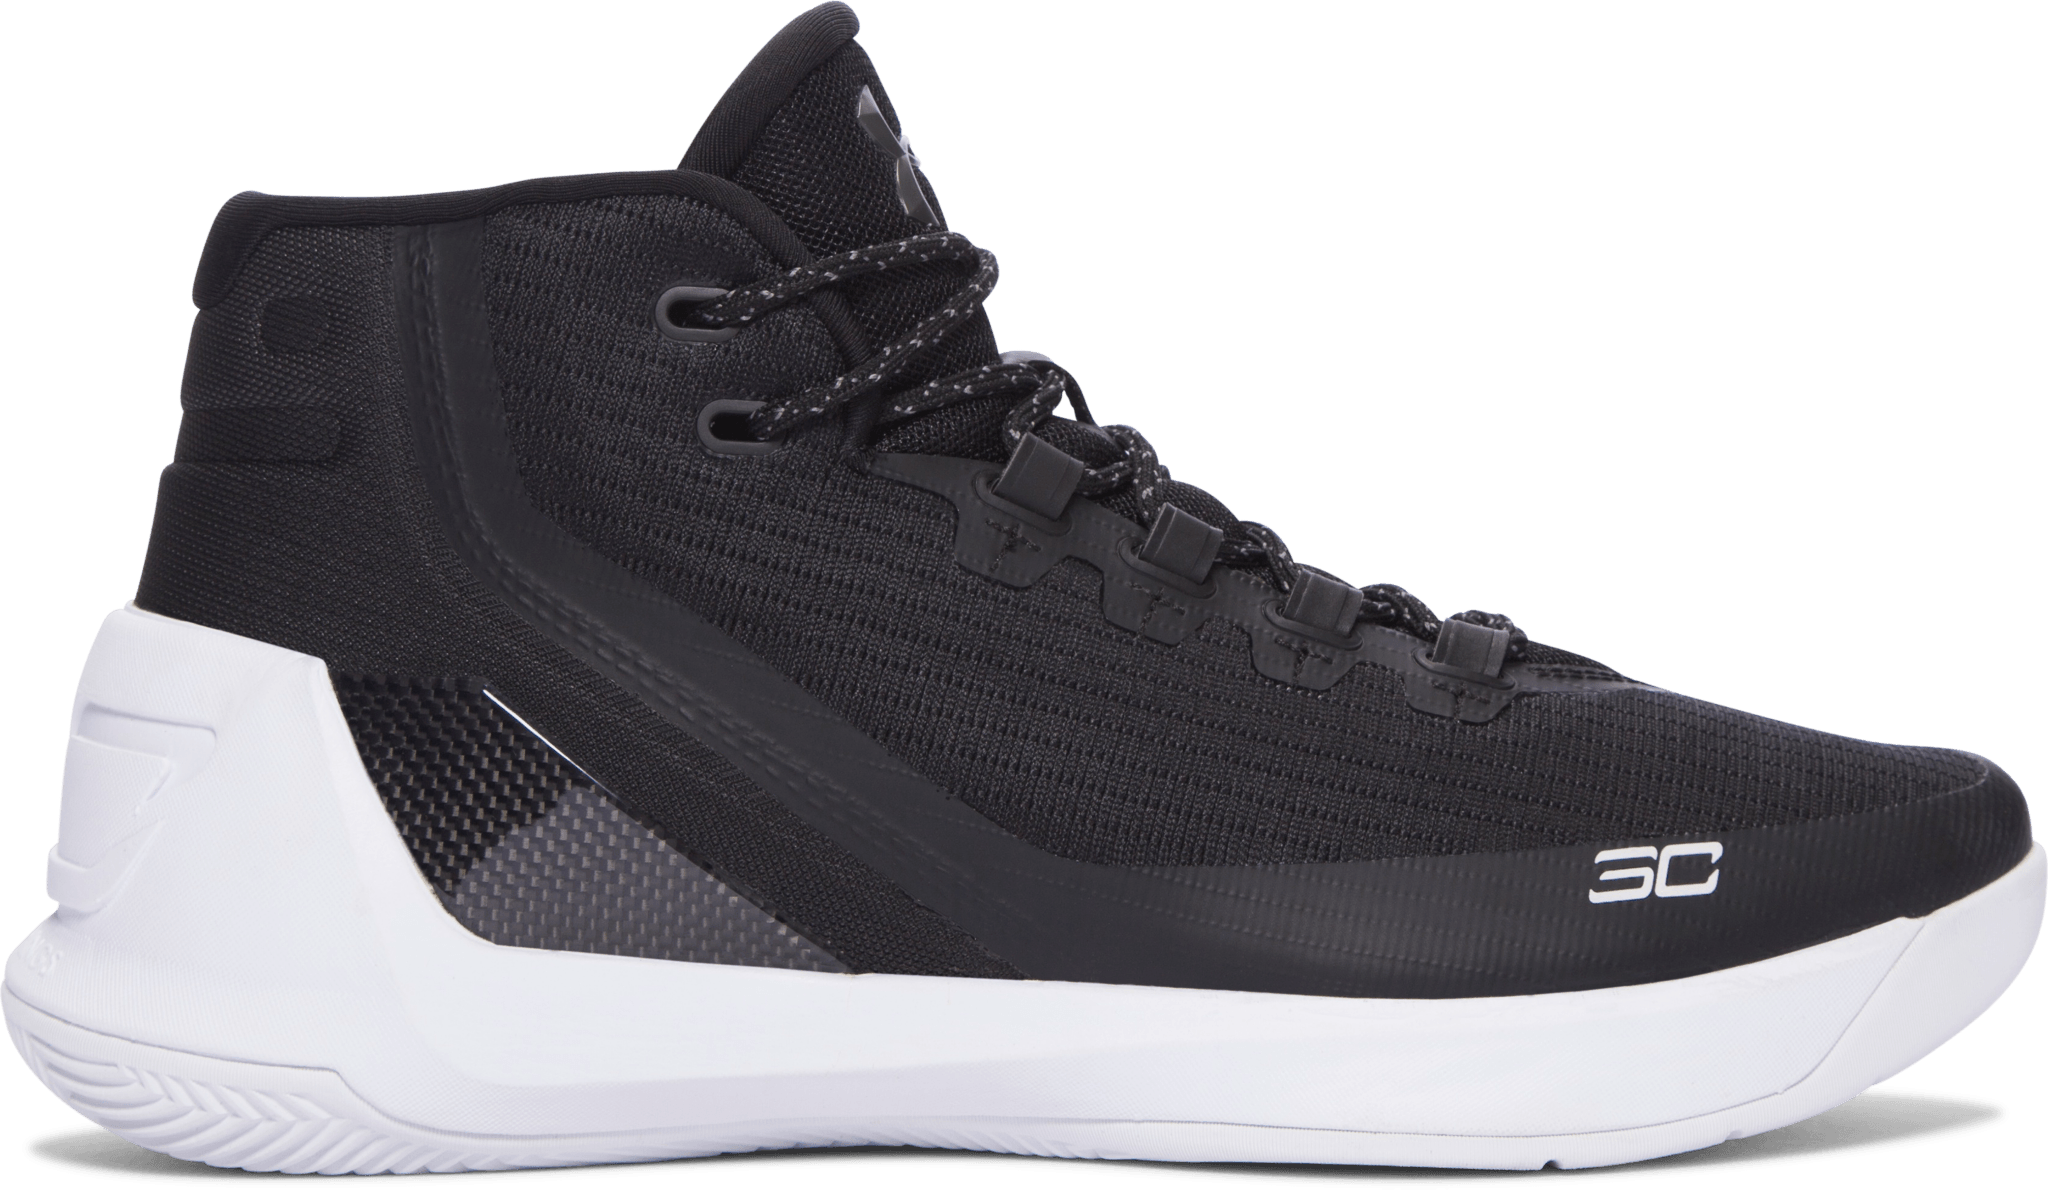 Under Armour Curry 3 - Review, Deals, Pics of 17 Colorways